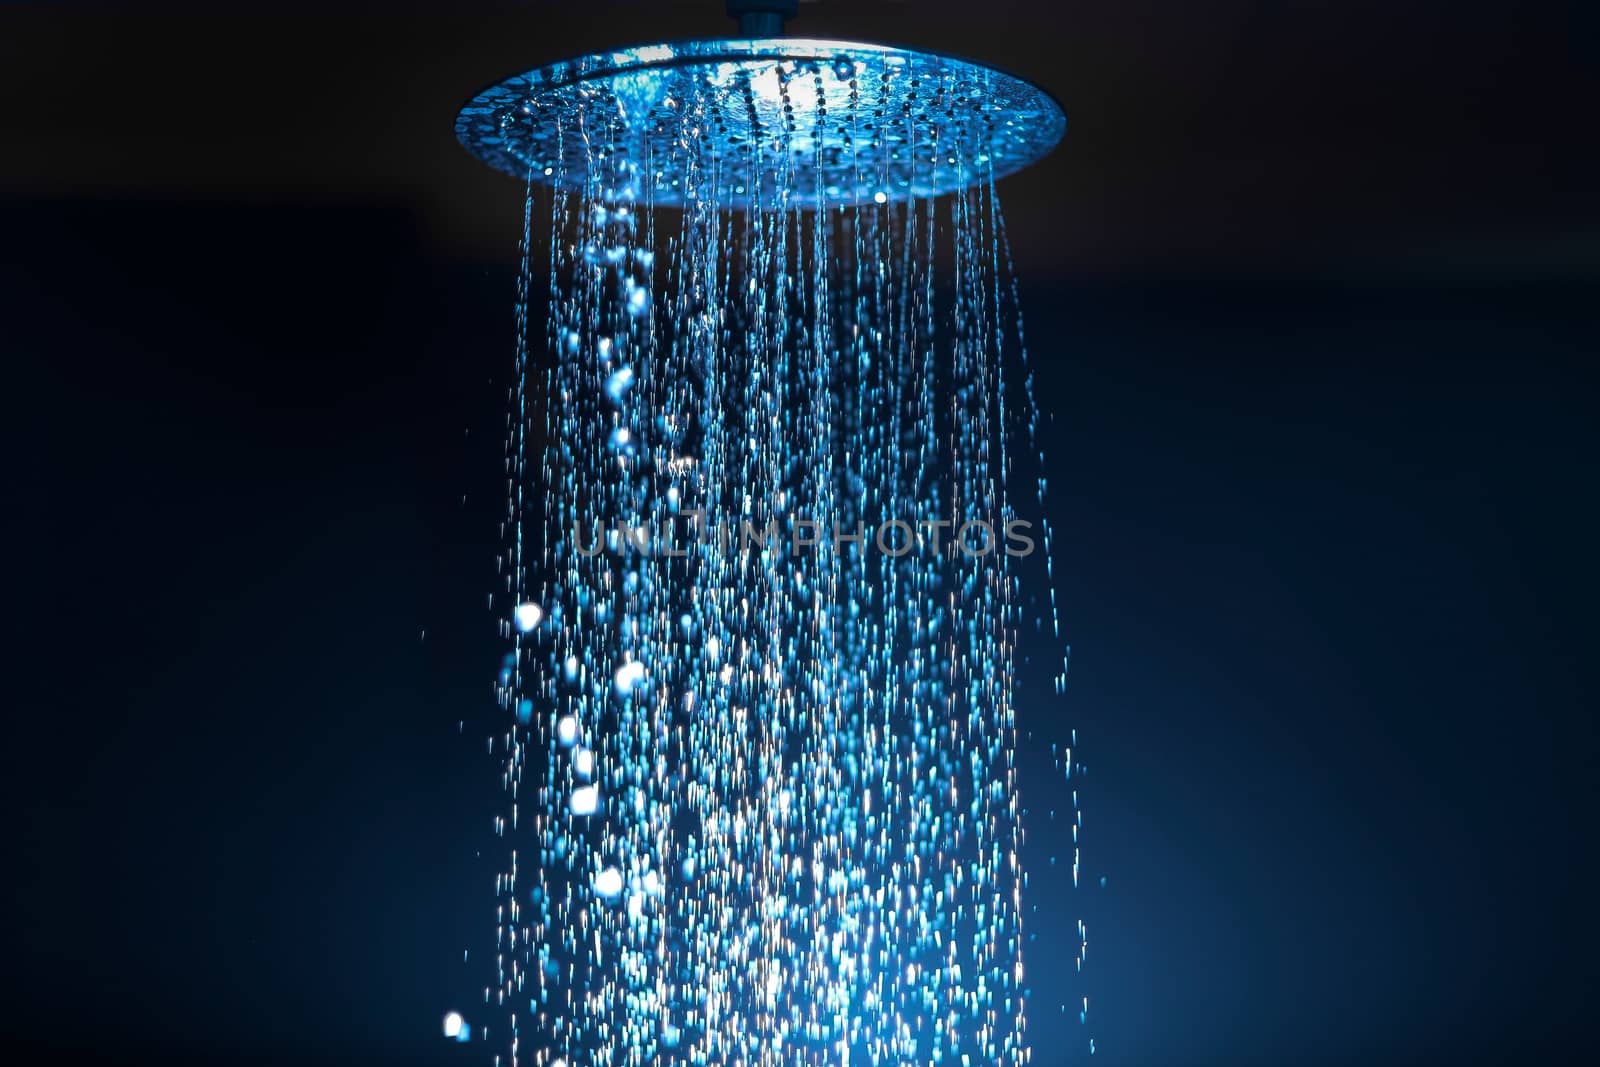 Water falling from the shower on a dark background with blue backlight in the aqua zone